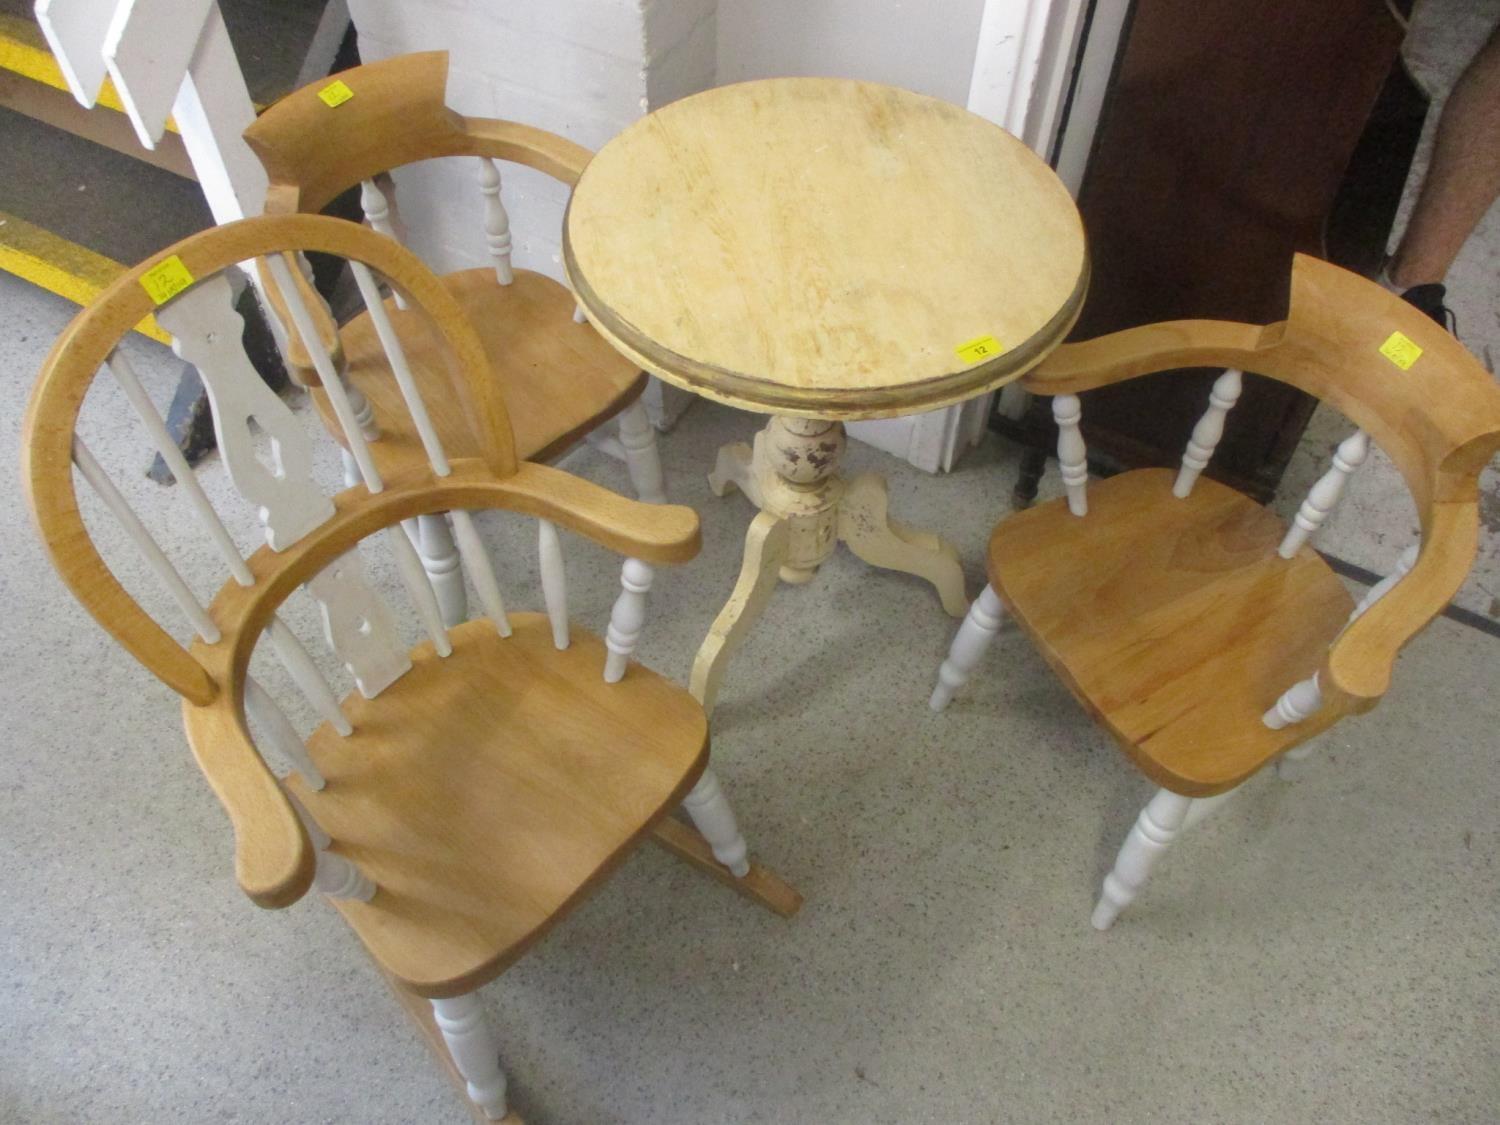 Two child's chairs, a rocking chair and an occasional table